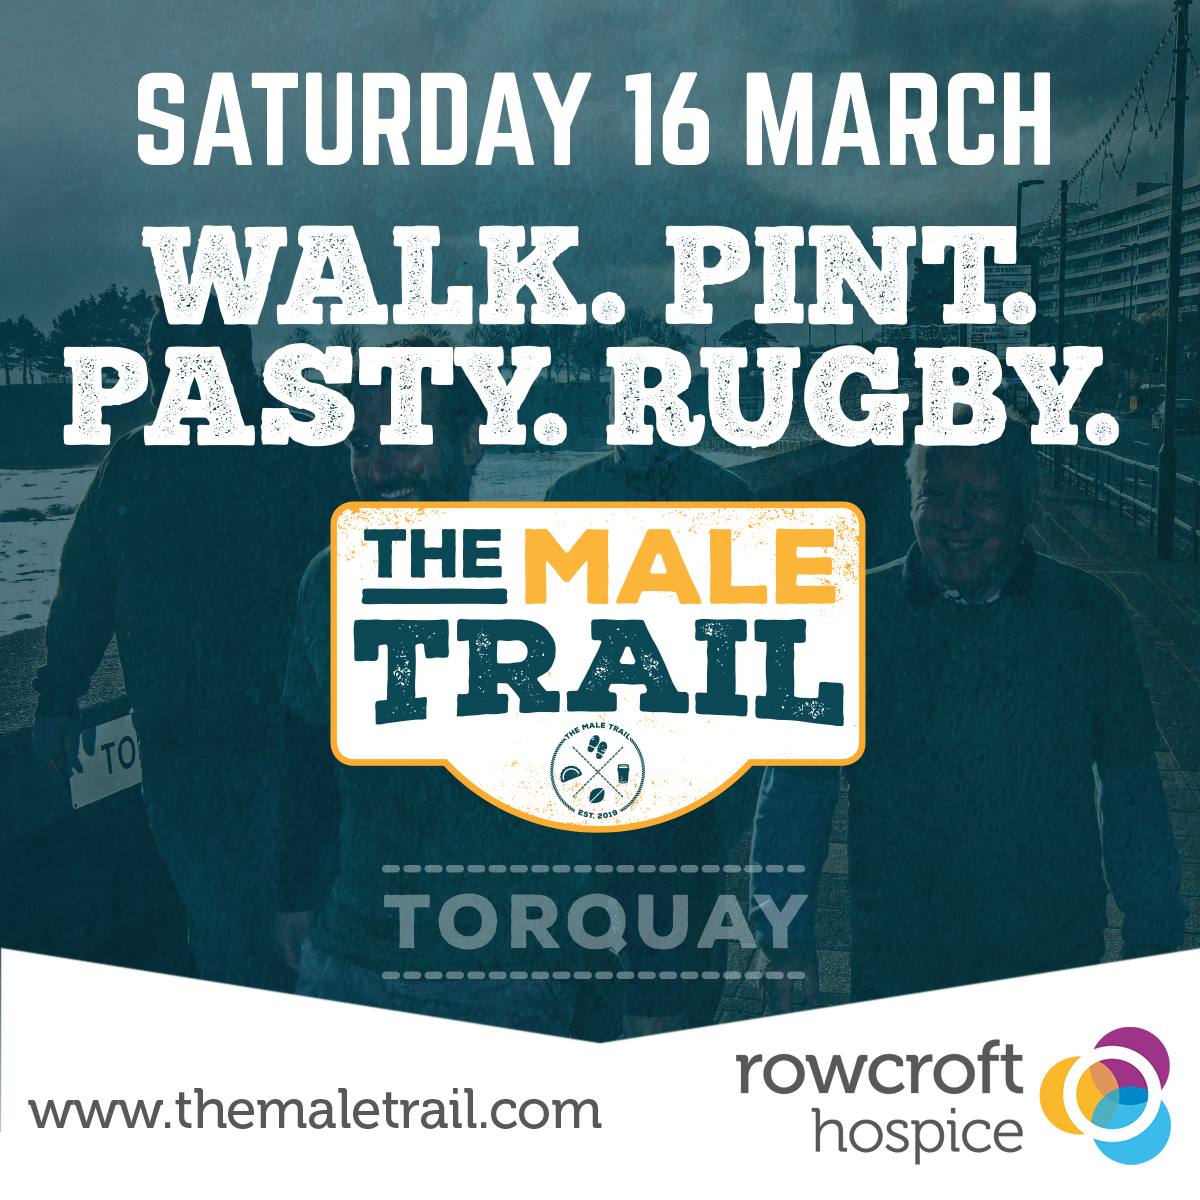 MALE TRAIL for Rowcroft Hospice